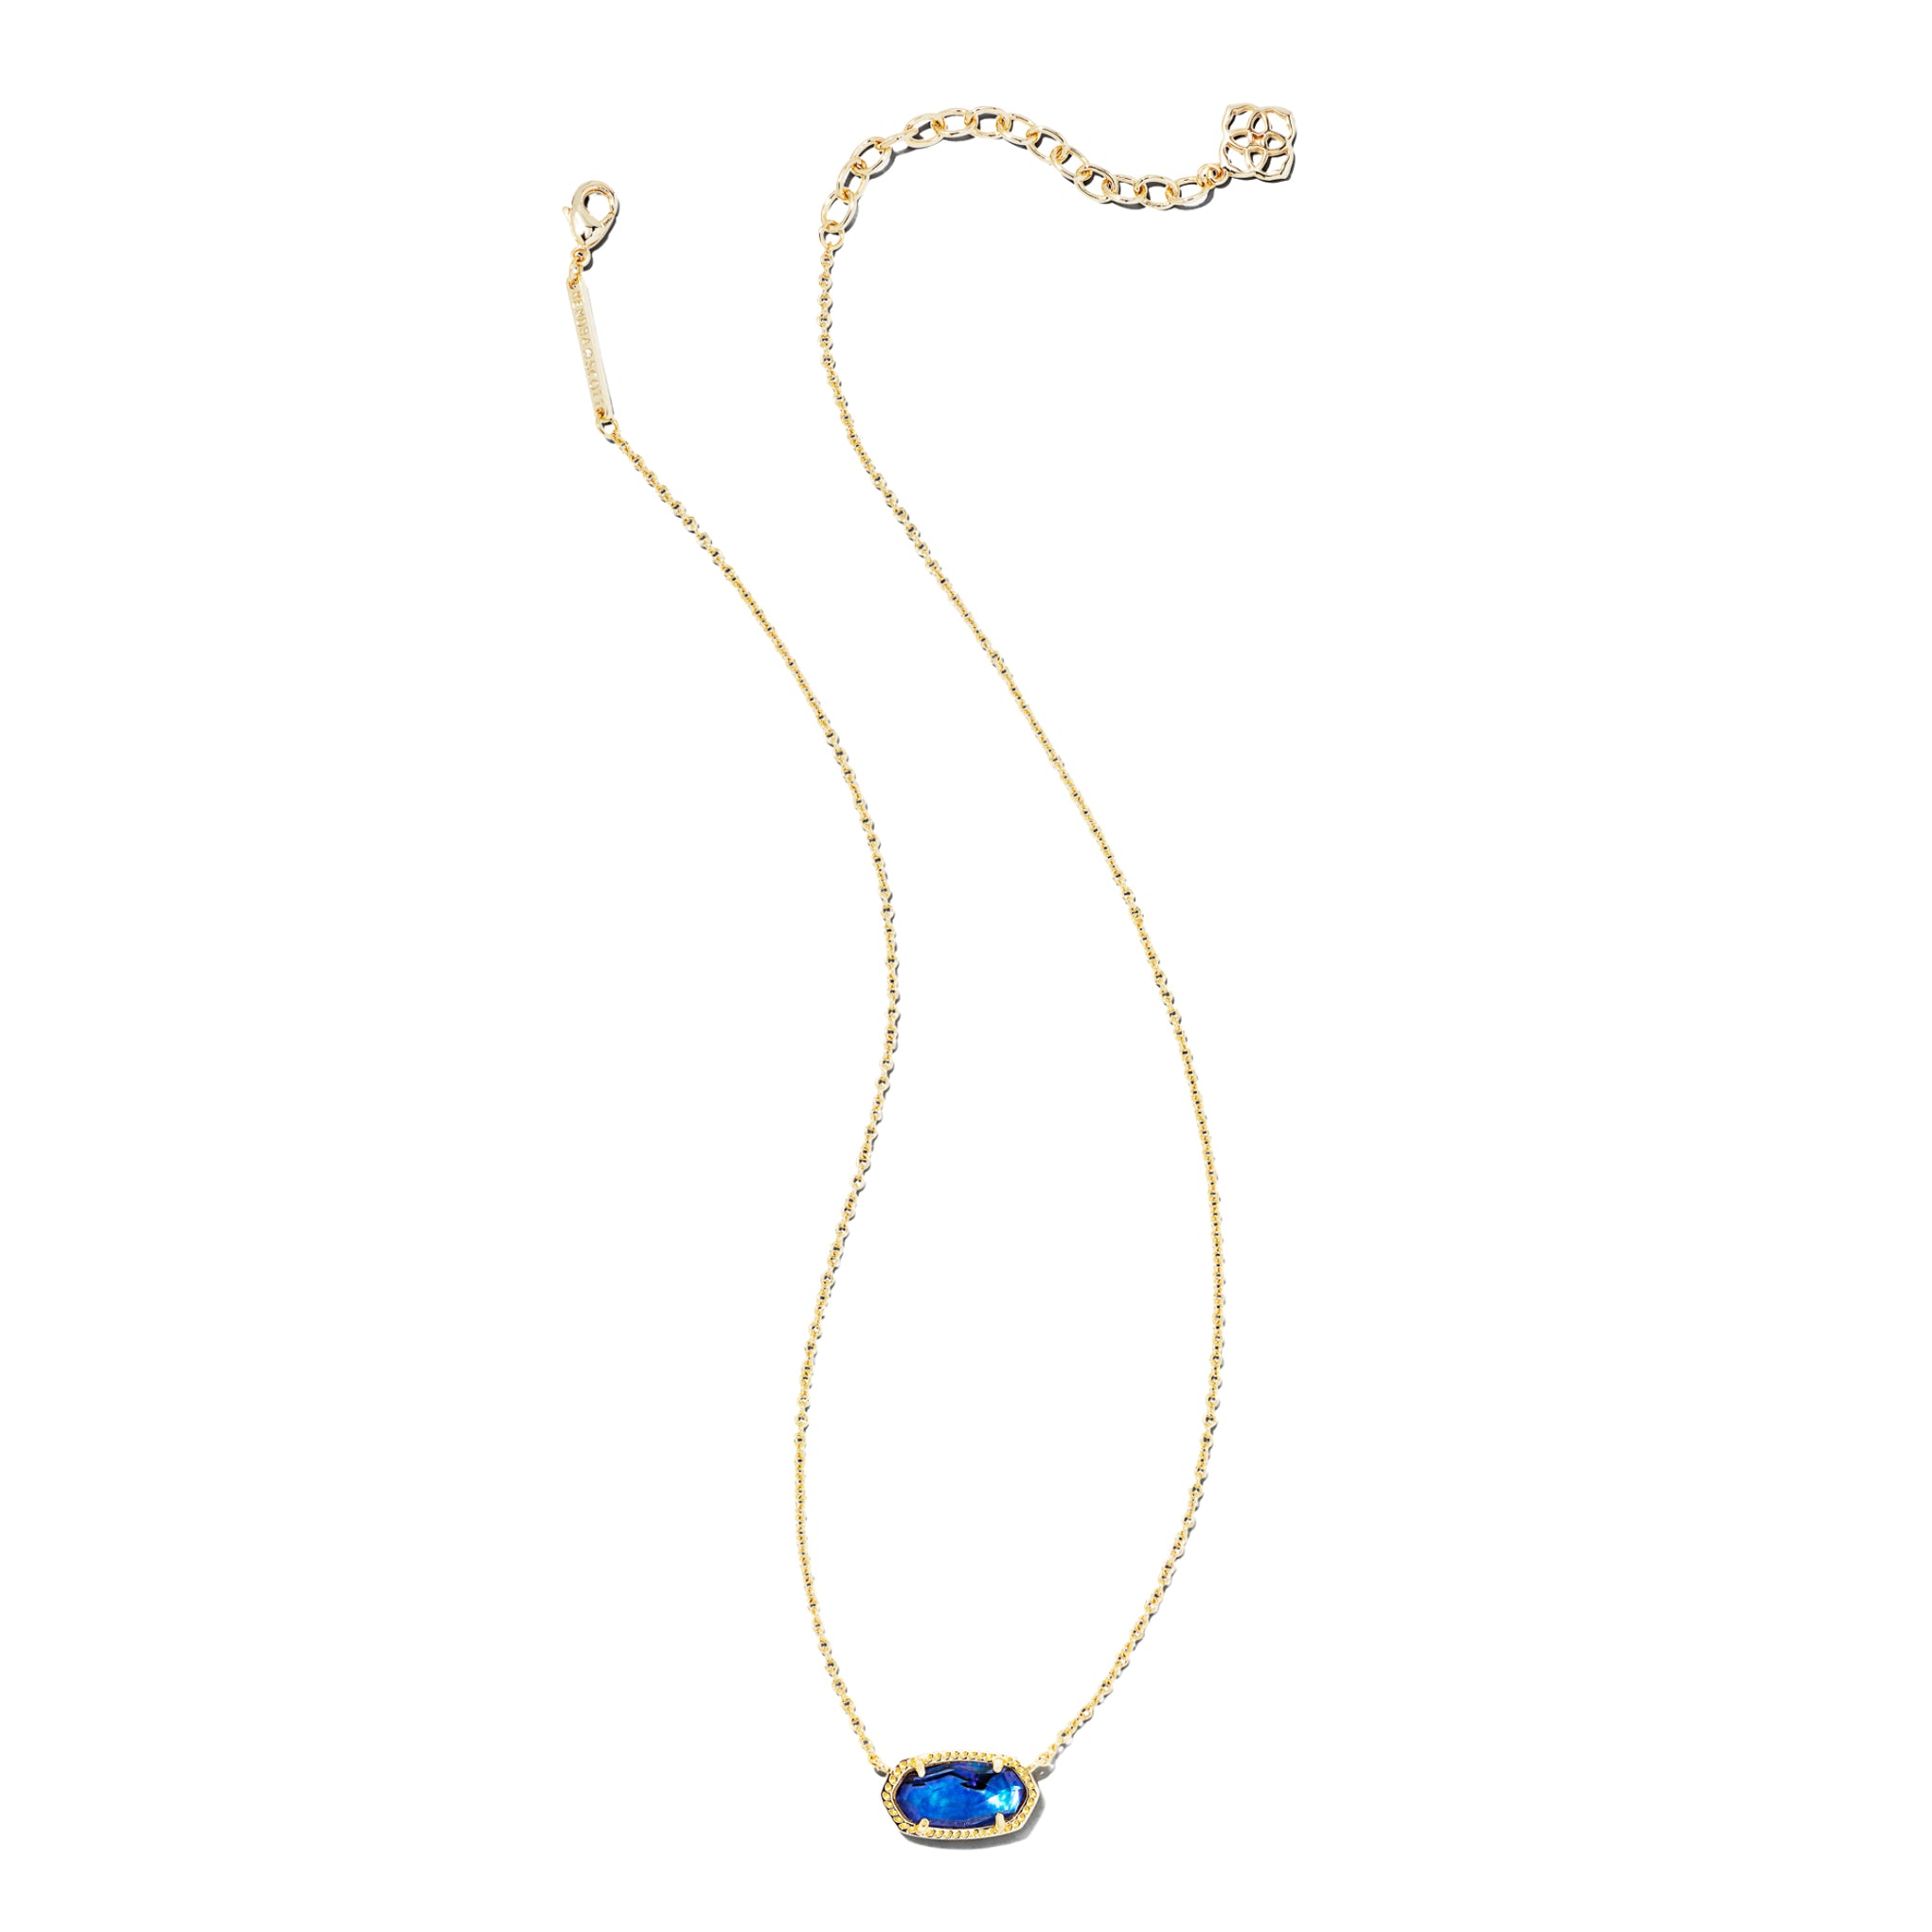 Kendra Scott Elisa Oval Pendant Necklace in Navy Abalone and Gold Plated